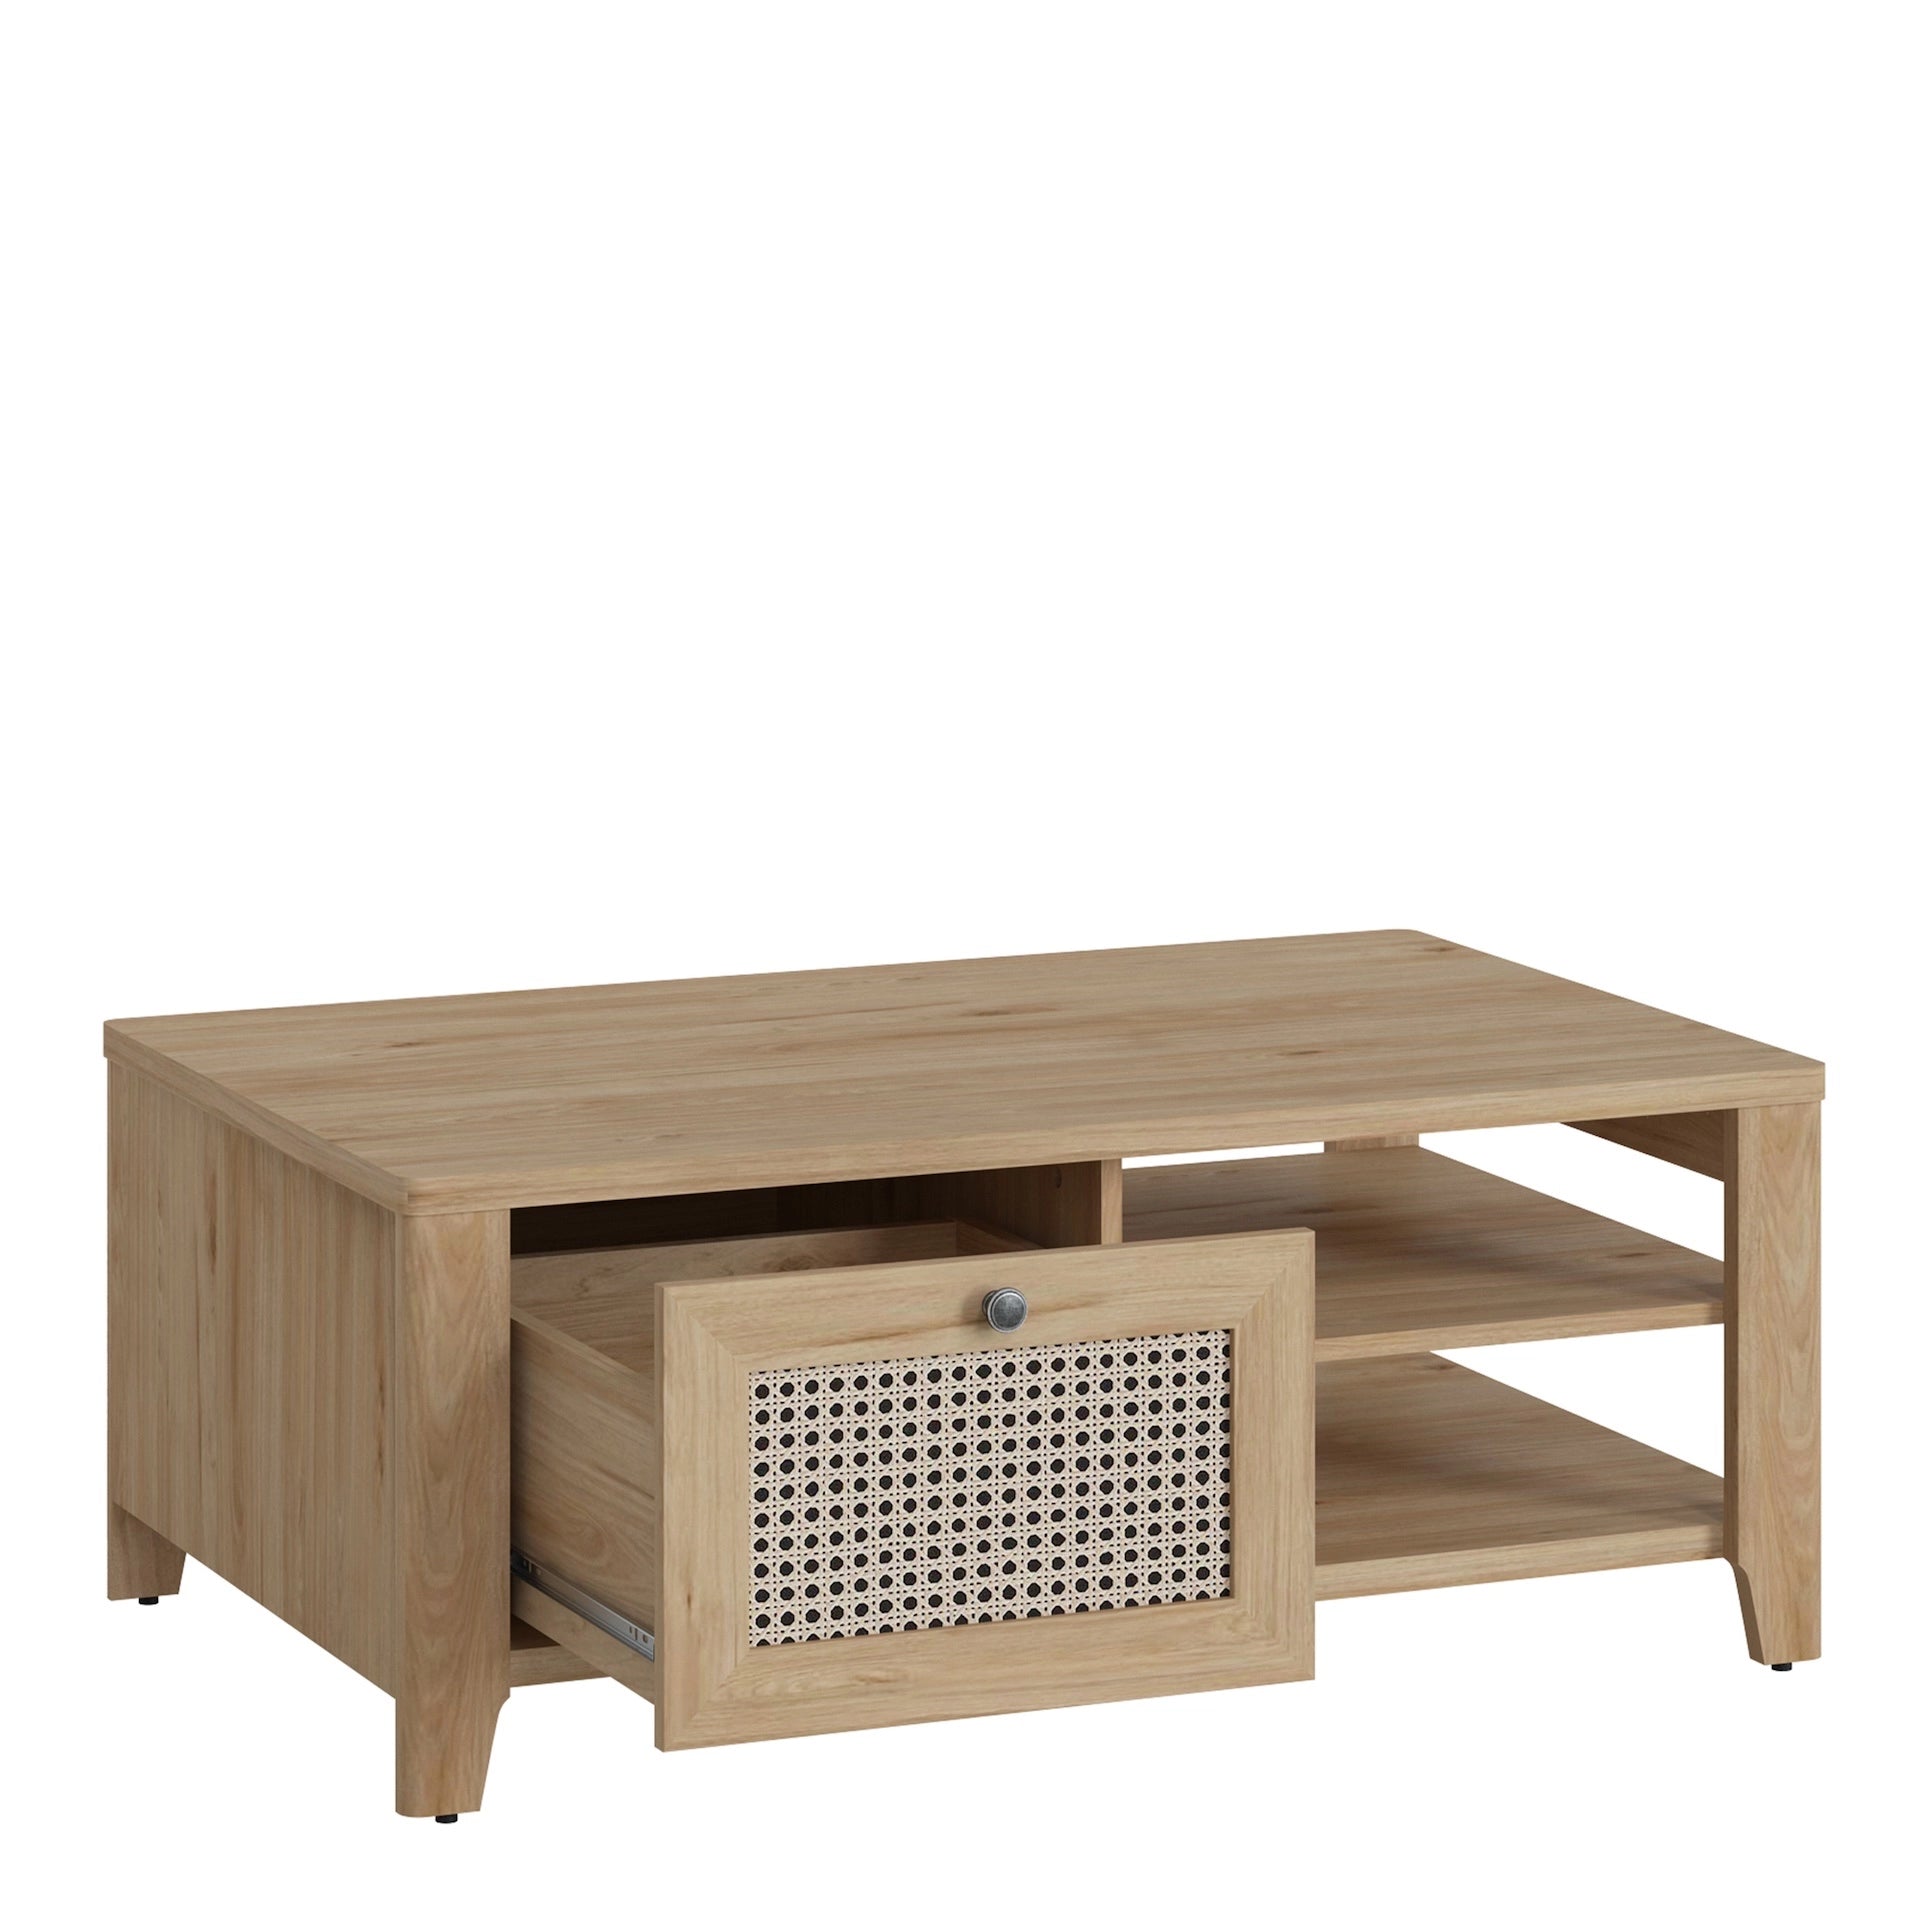 Furniture To Go Cestino Coffee Table with 1 Drawer in Jackson Hickory Oak & Rattan Effect